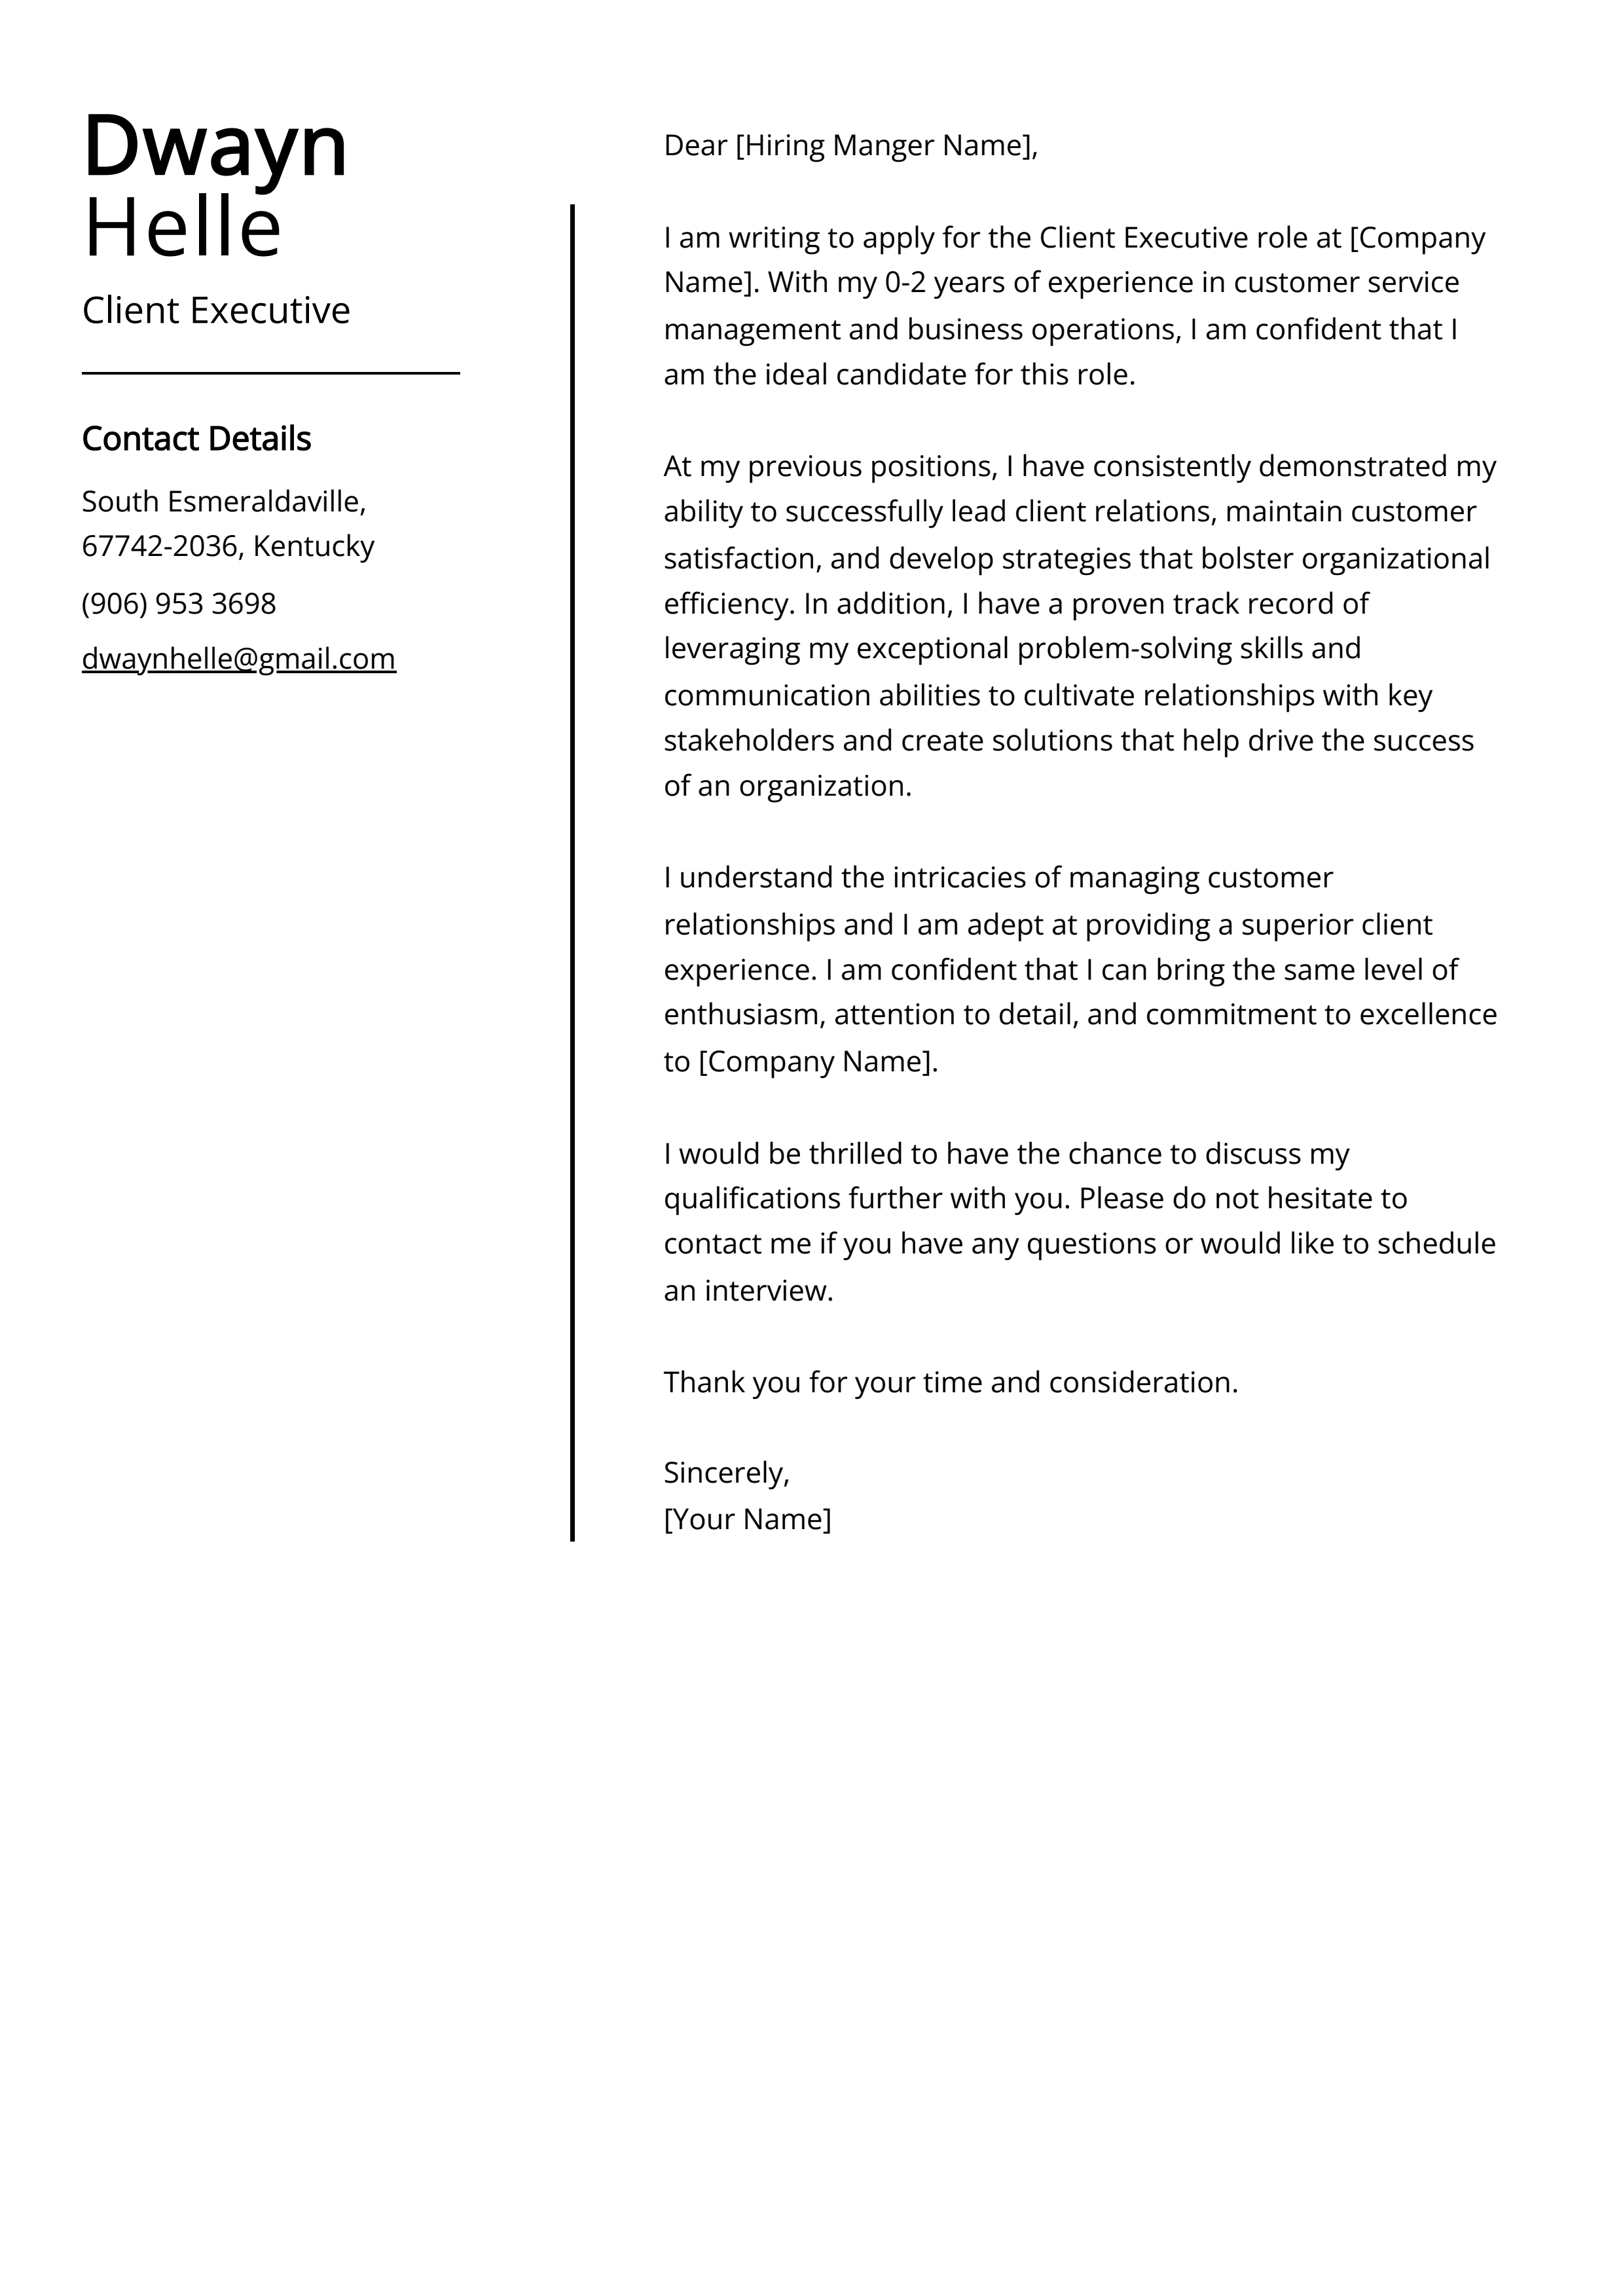 Client Executive Cover Letter Example